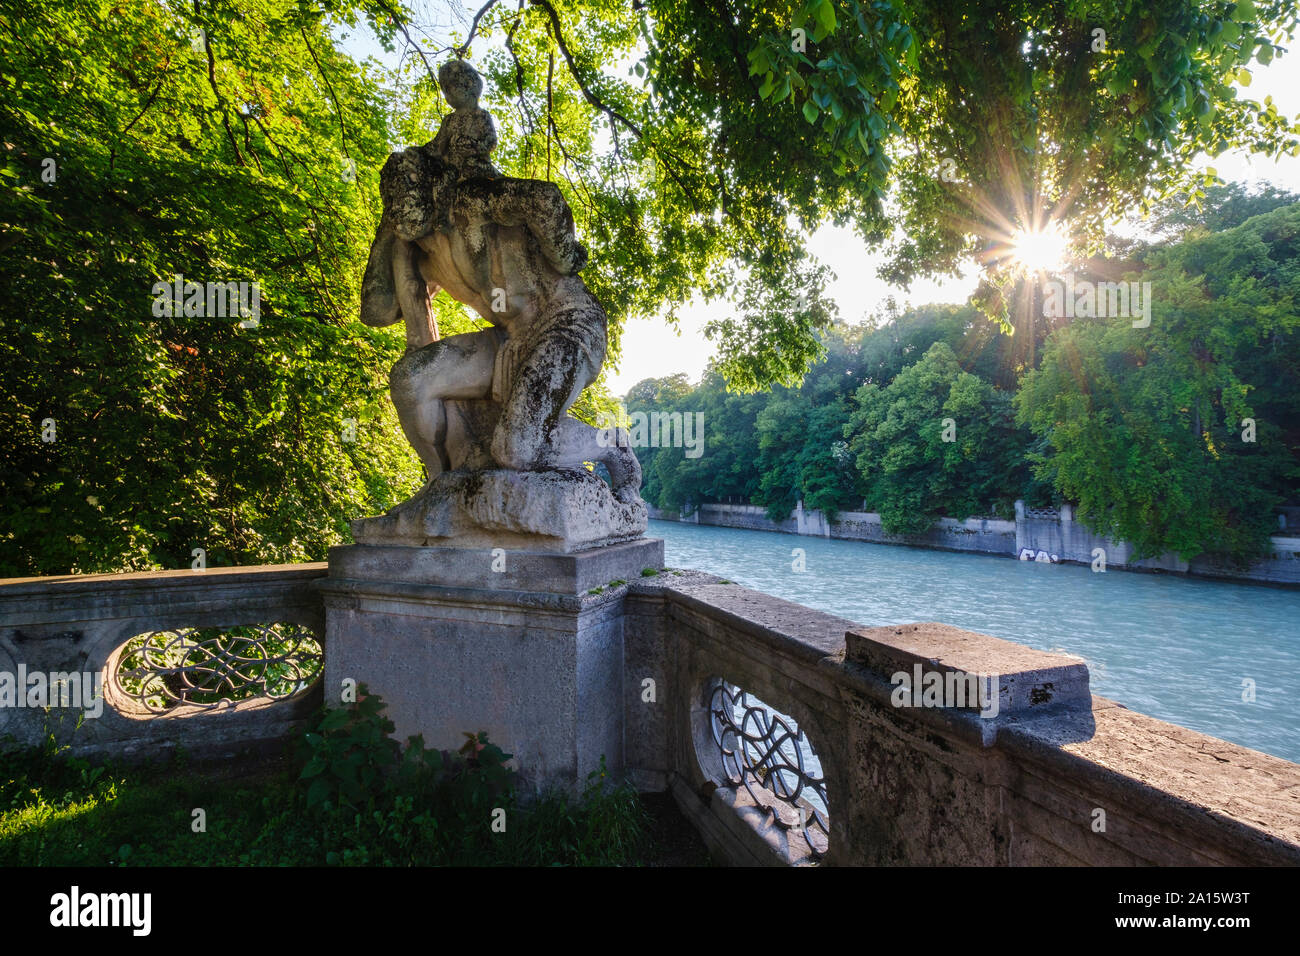 Germany, Upper Bavaria, Munich, St. Christopher's statue surrounded with trees by Isar river at sunset Stock Photo